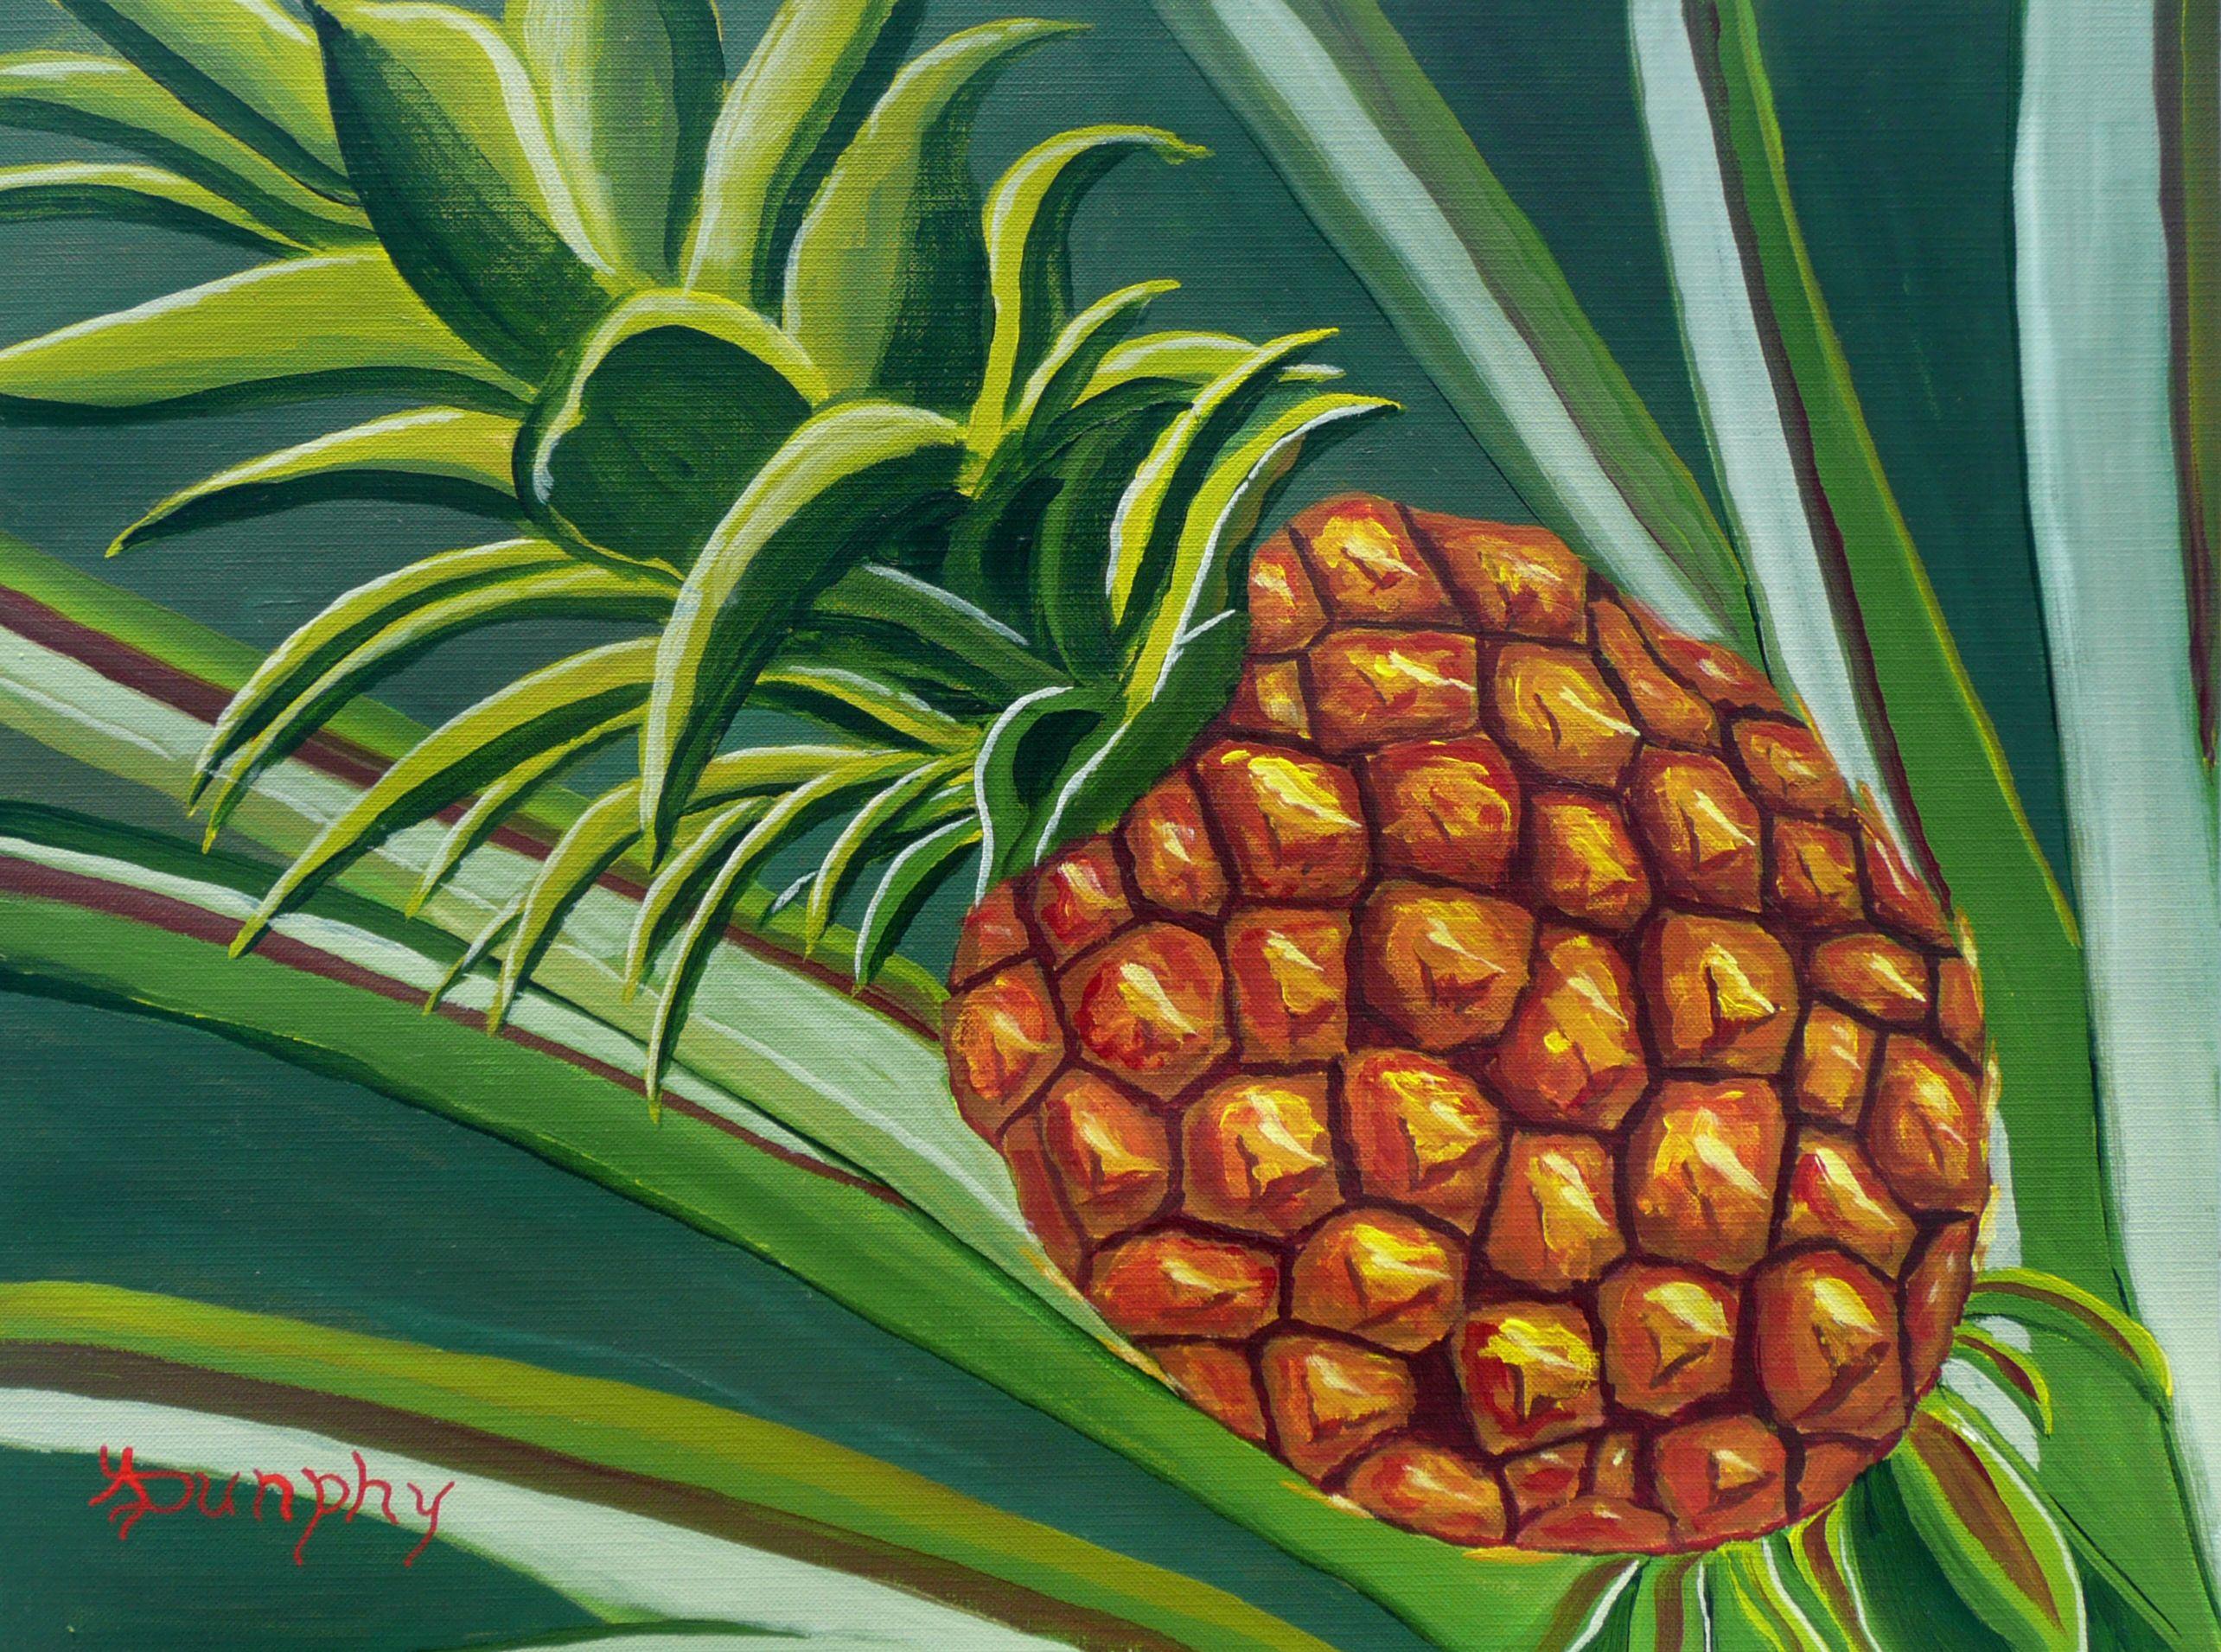 During a recent visit to the Dole pineapple plantation on the North Shore of Oahu, Hawaii, I i was fascinated by the endless fields of pineapples and so, decided to make a painting of this delicious fruit.    This painting has been created using